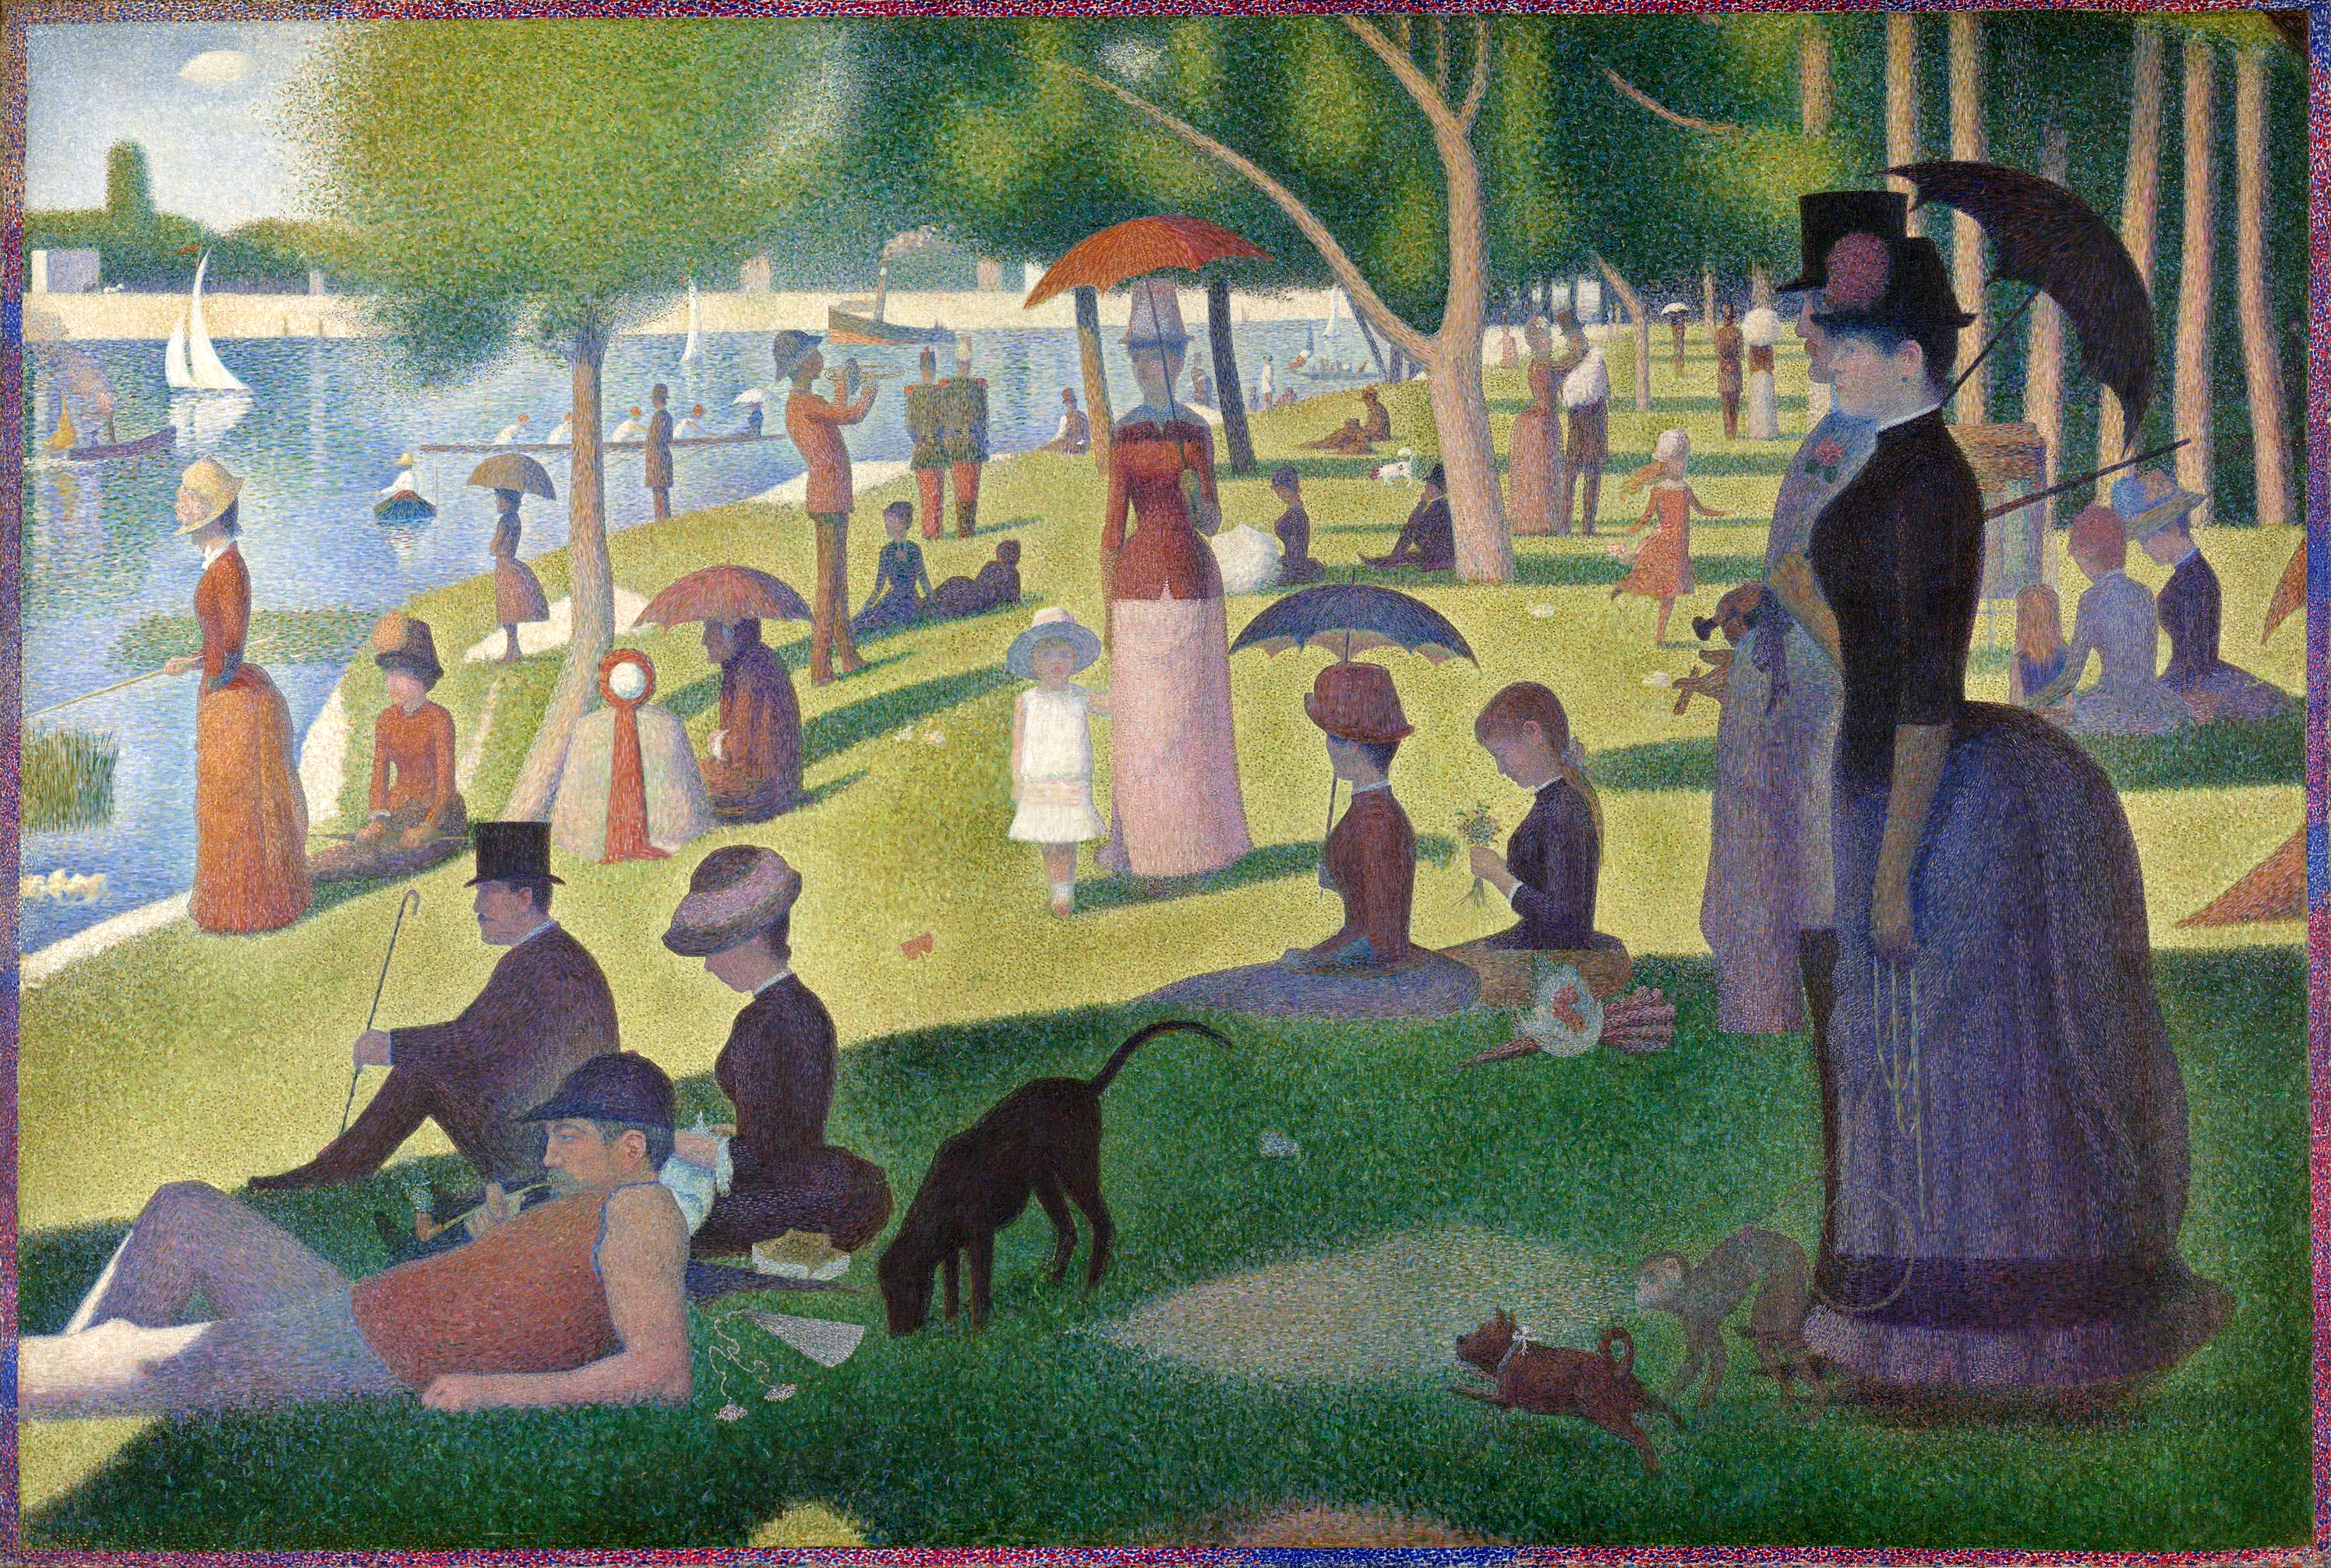 A Sunday Afternoon on the Island of La Grande Jatte by Georges Seurat - c. 1884-1886 - 207,5 x 208 cm Art Institute of Chicago